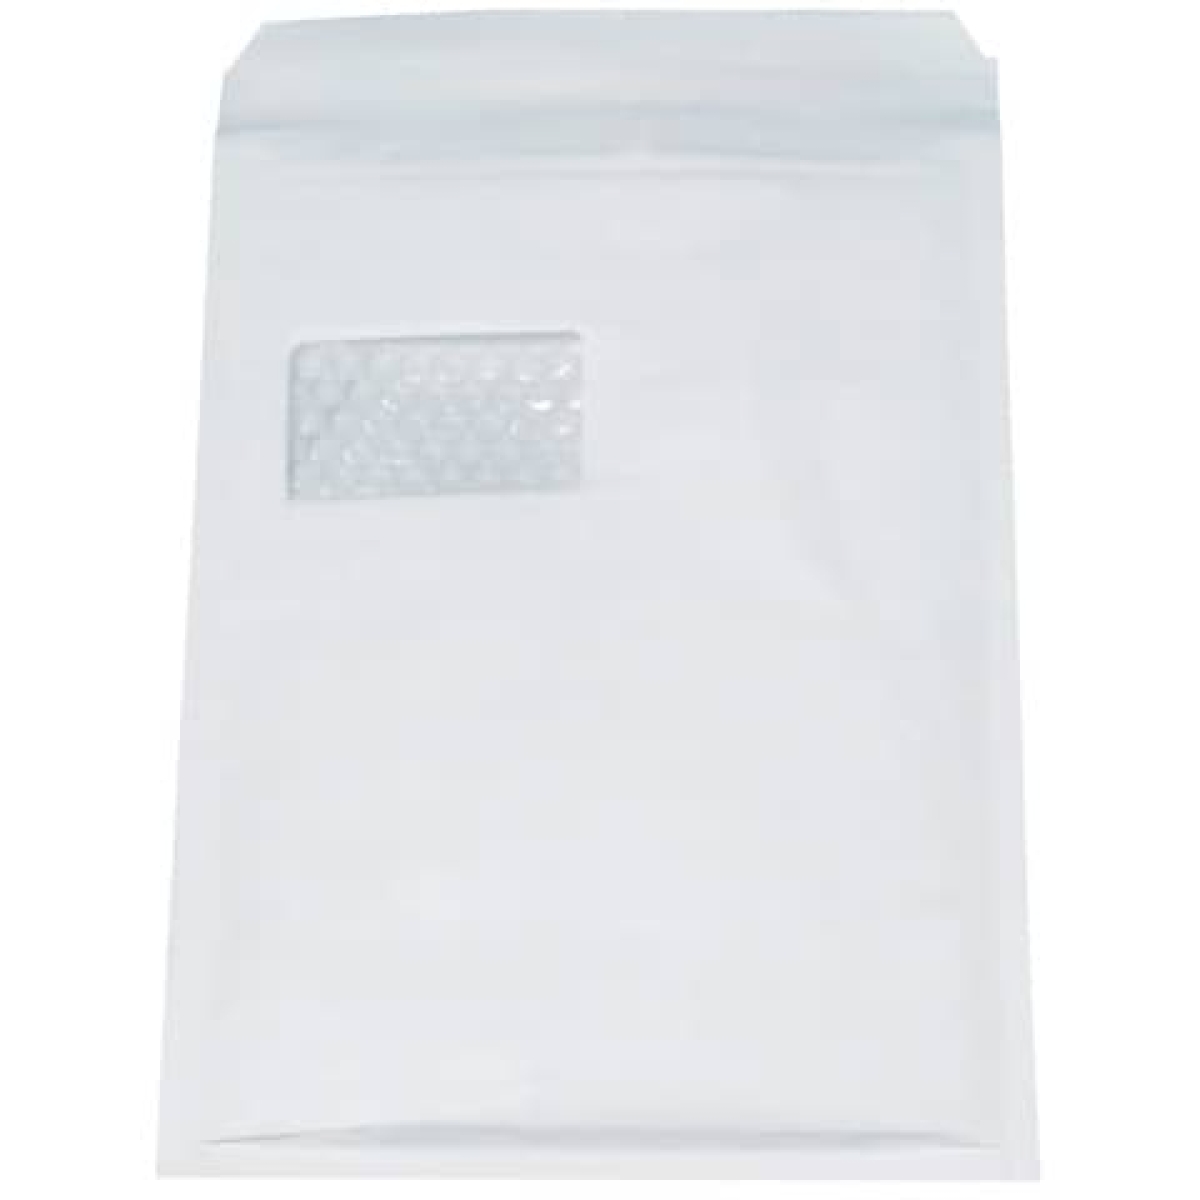 AROFOLBubble envelope with window 7/G, 230x340mm, 100 pieces, white 2FVAF000517-Price for 100 pcs.Article-No: 4009445005171